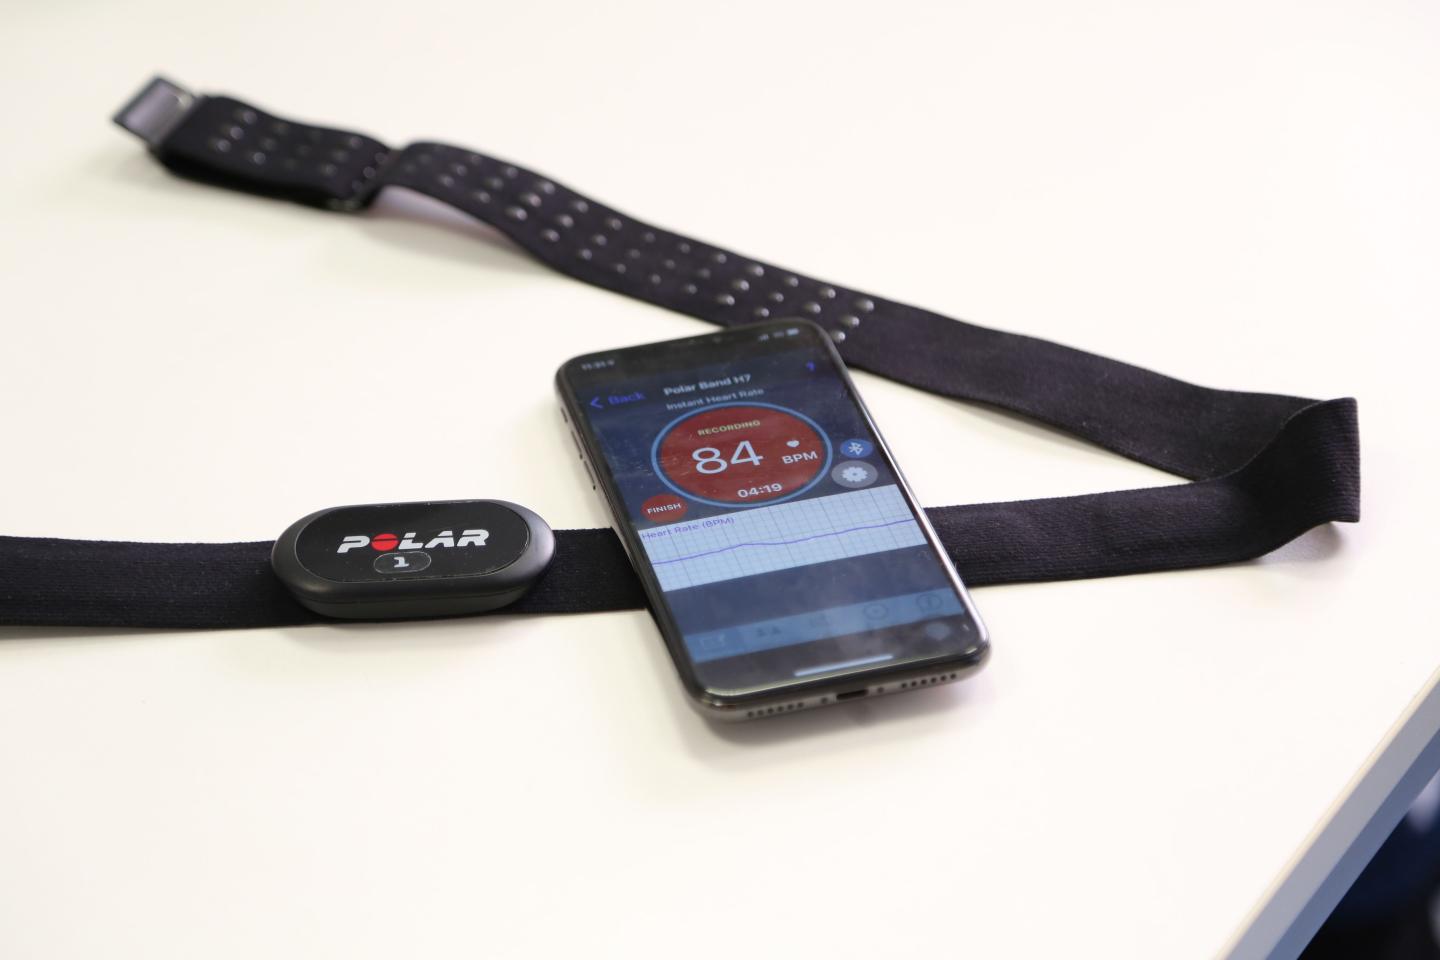 The technology uses a chest strap connected to a mobile app that measures heart rate variability